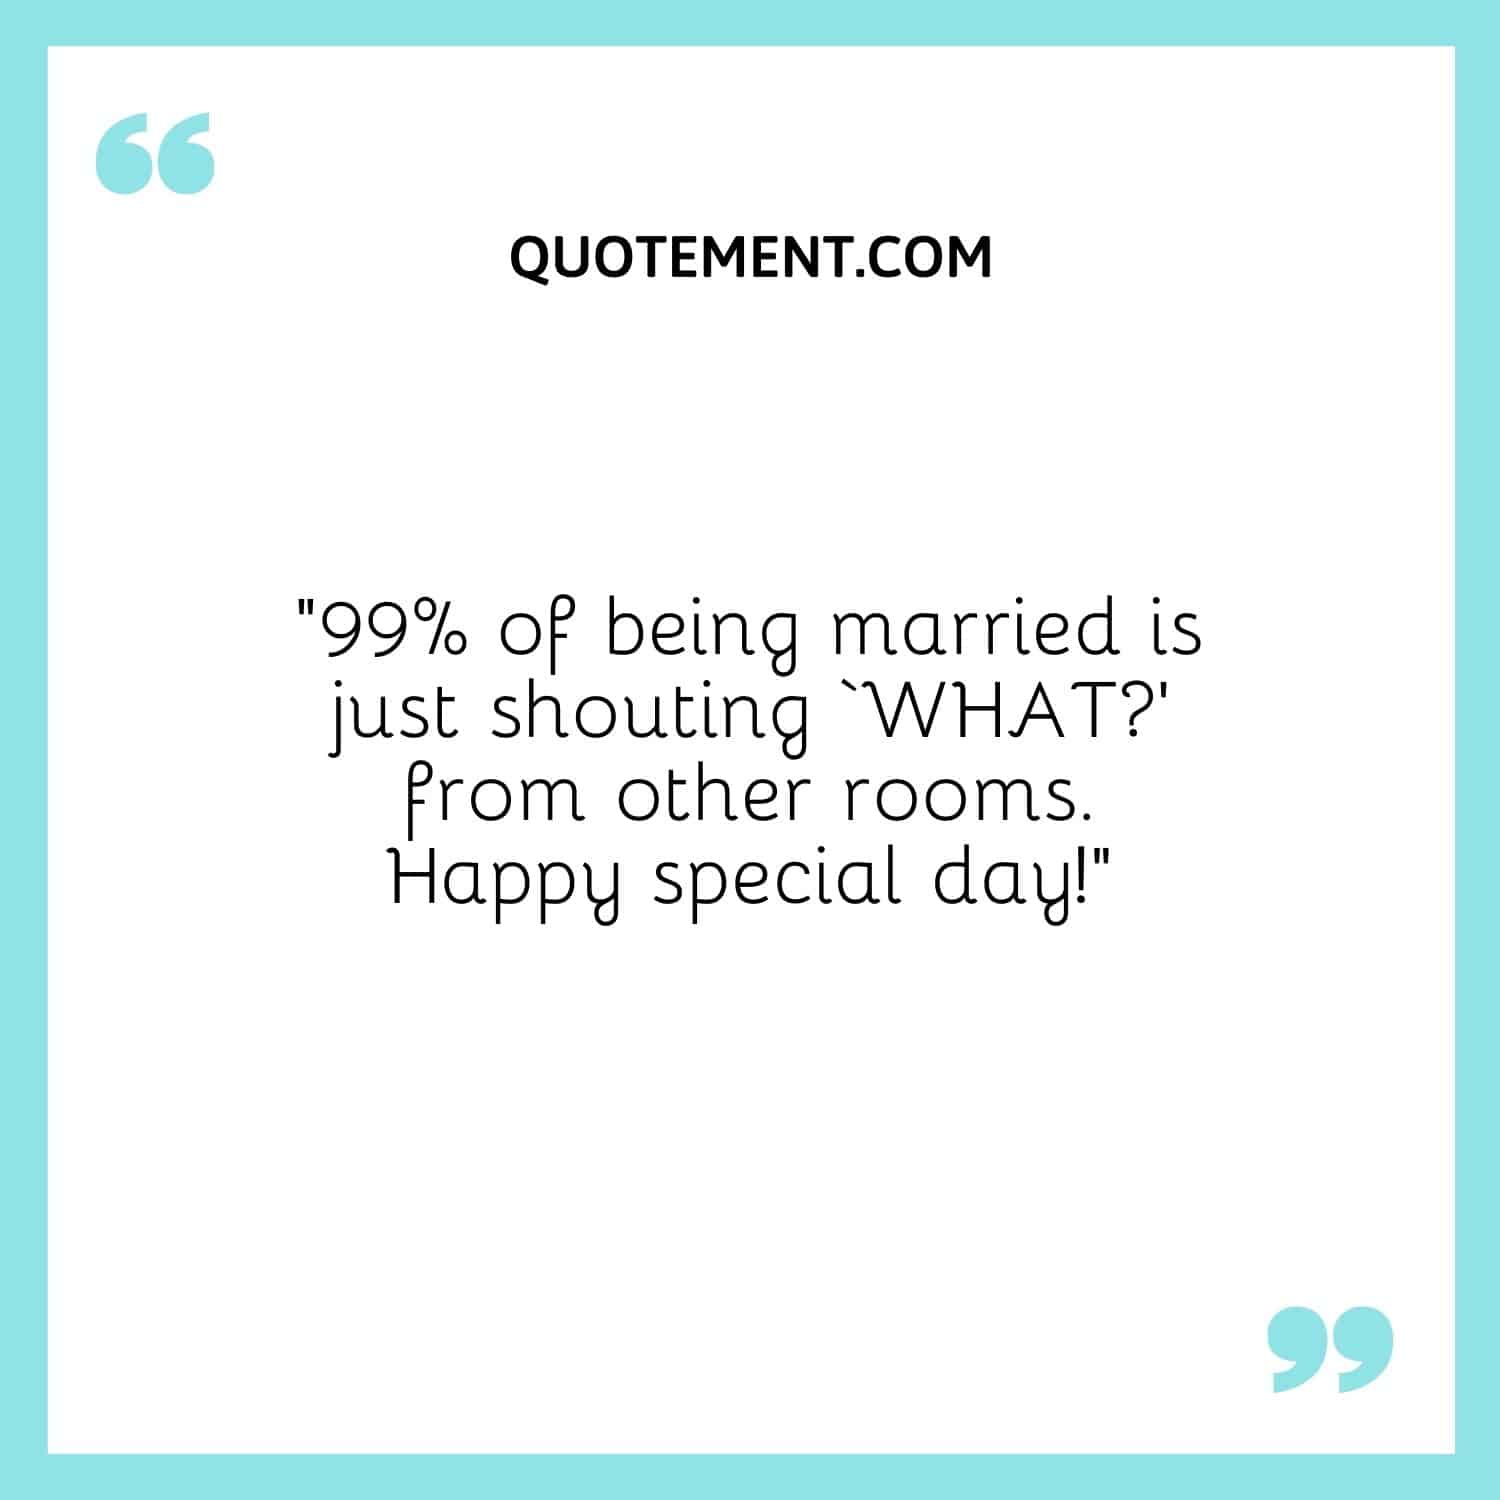 “99% of being married is just shouting ‘WHAT’ from other rooms. Happy special day!”